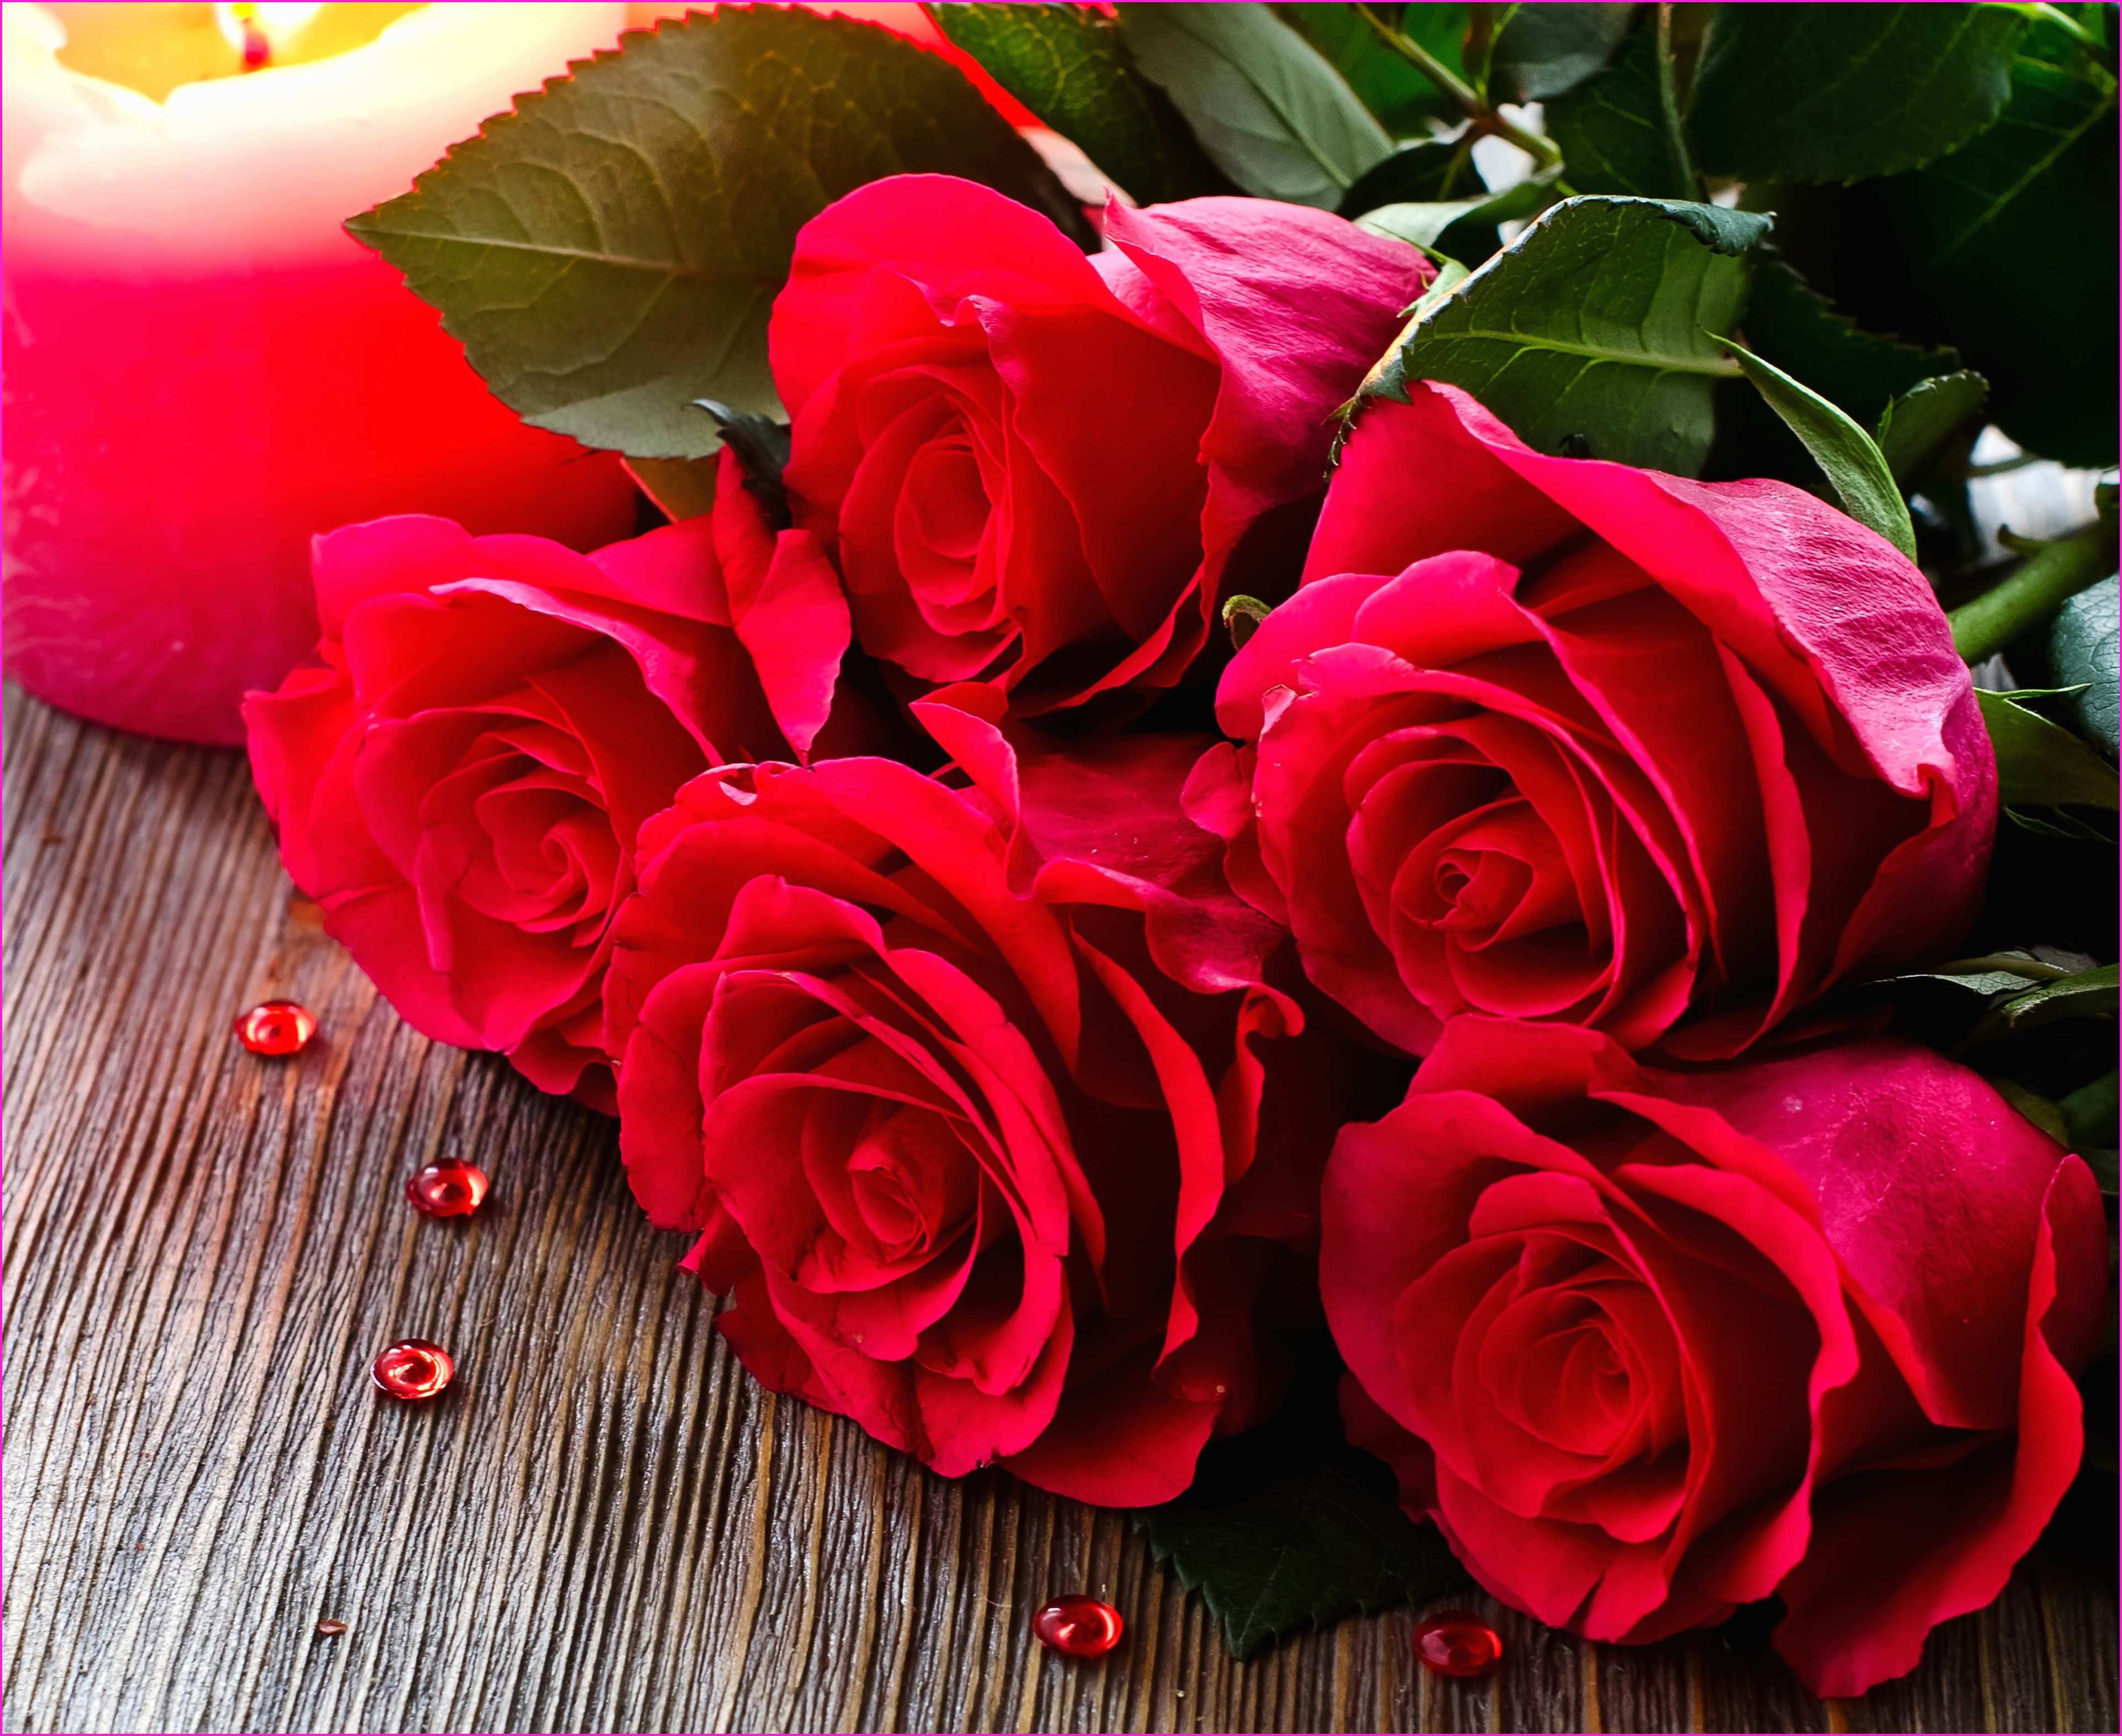 Rose Bouquet Image Fabulous Happy Rose Day Wallpaper Image